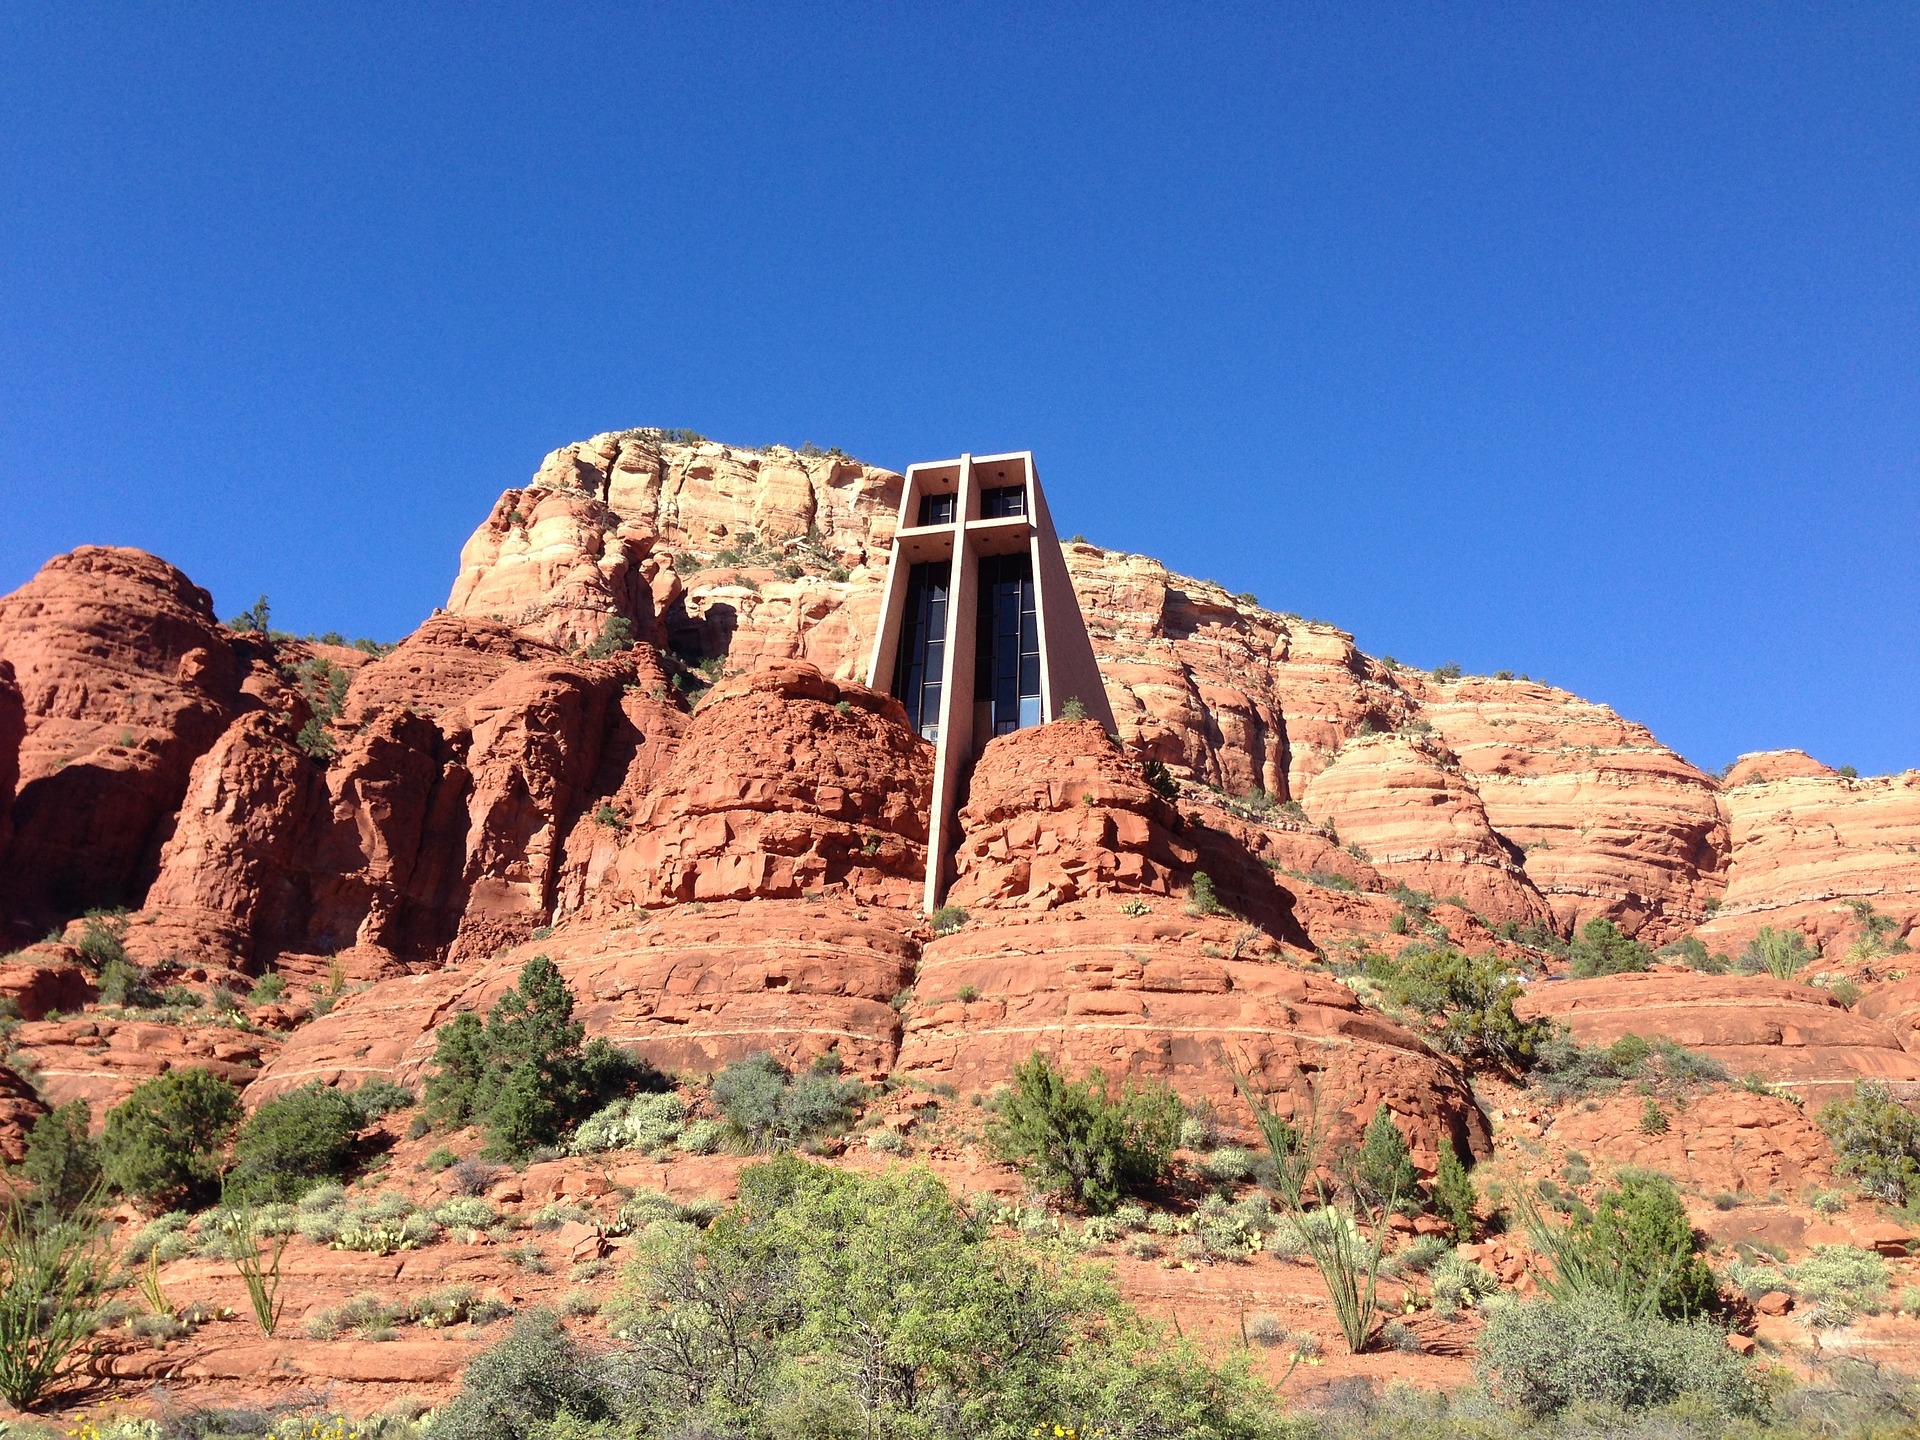 Perched in the mountains of Sedona, AZ, the Chapel of the Holy Cross offers a wonderful vantage point to see God's majestic creation.